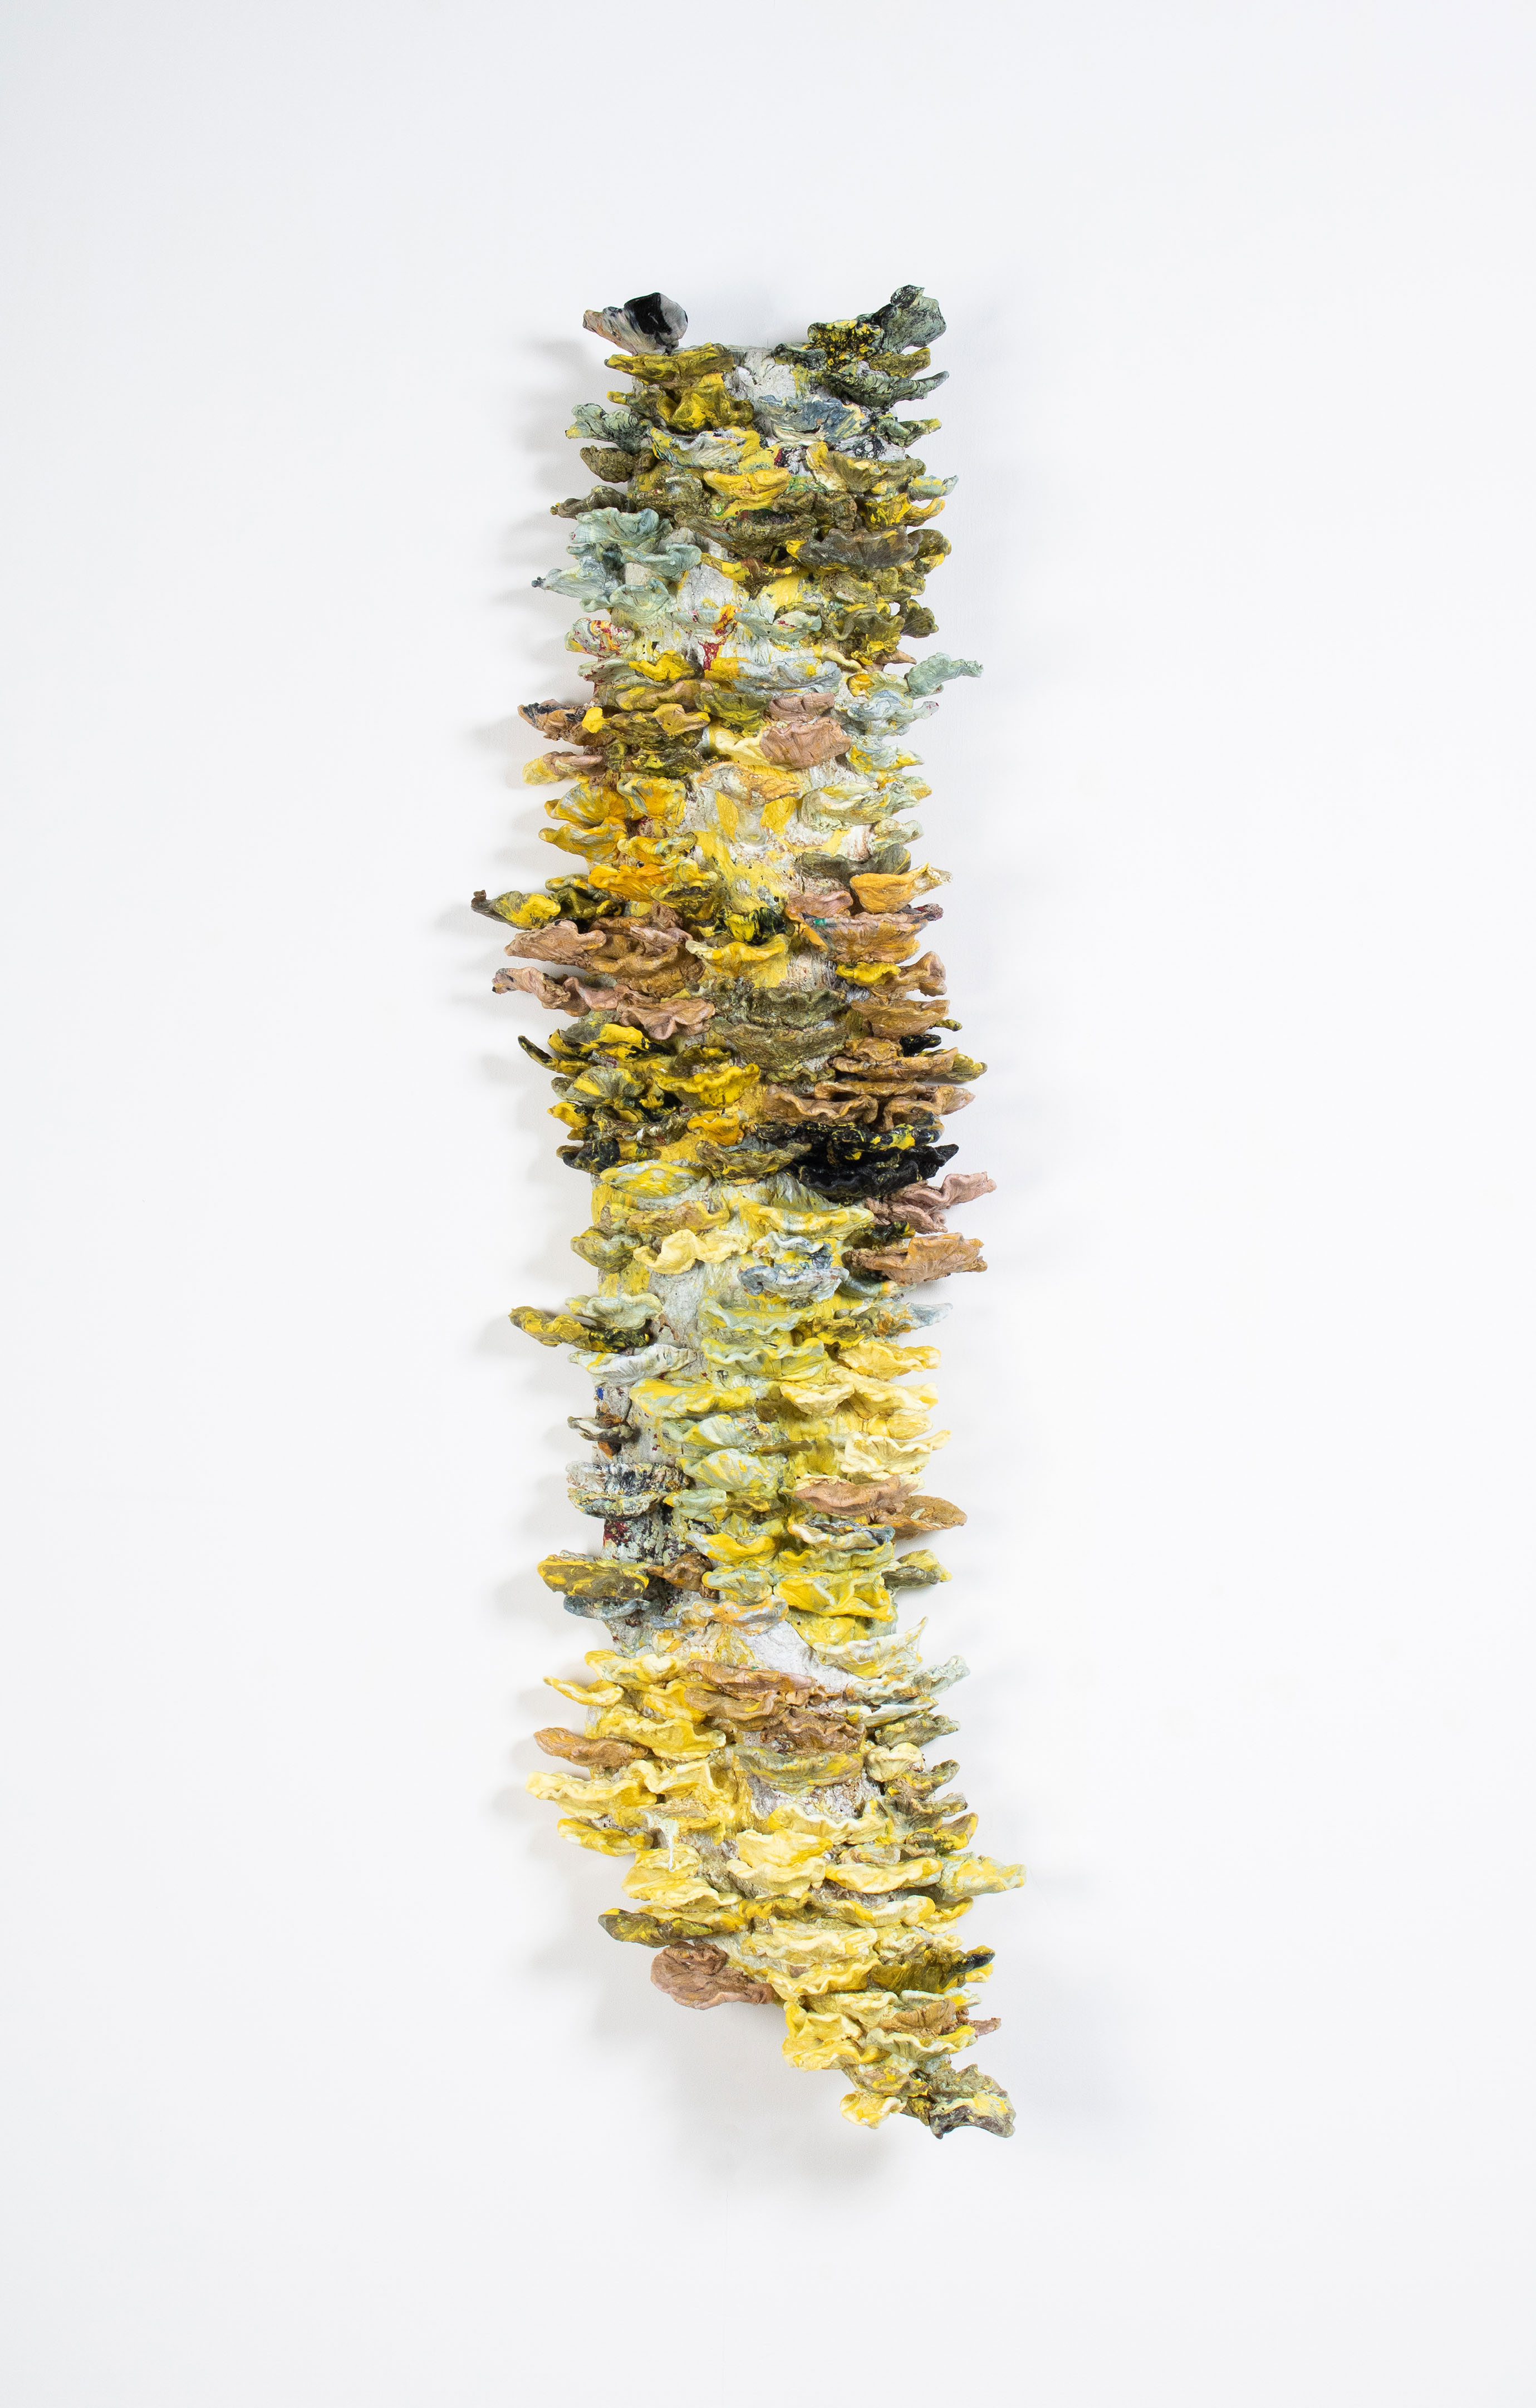 Infinity, Infinity, Infinity by Chrystal Rimmer | Lethbridge Landscape Prize 2022 Finalists | Lethbridge Gallery